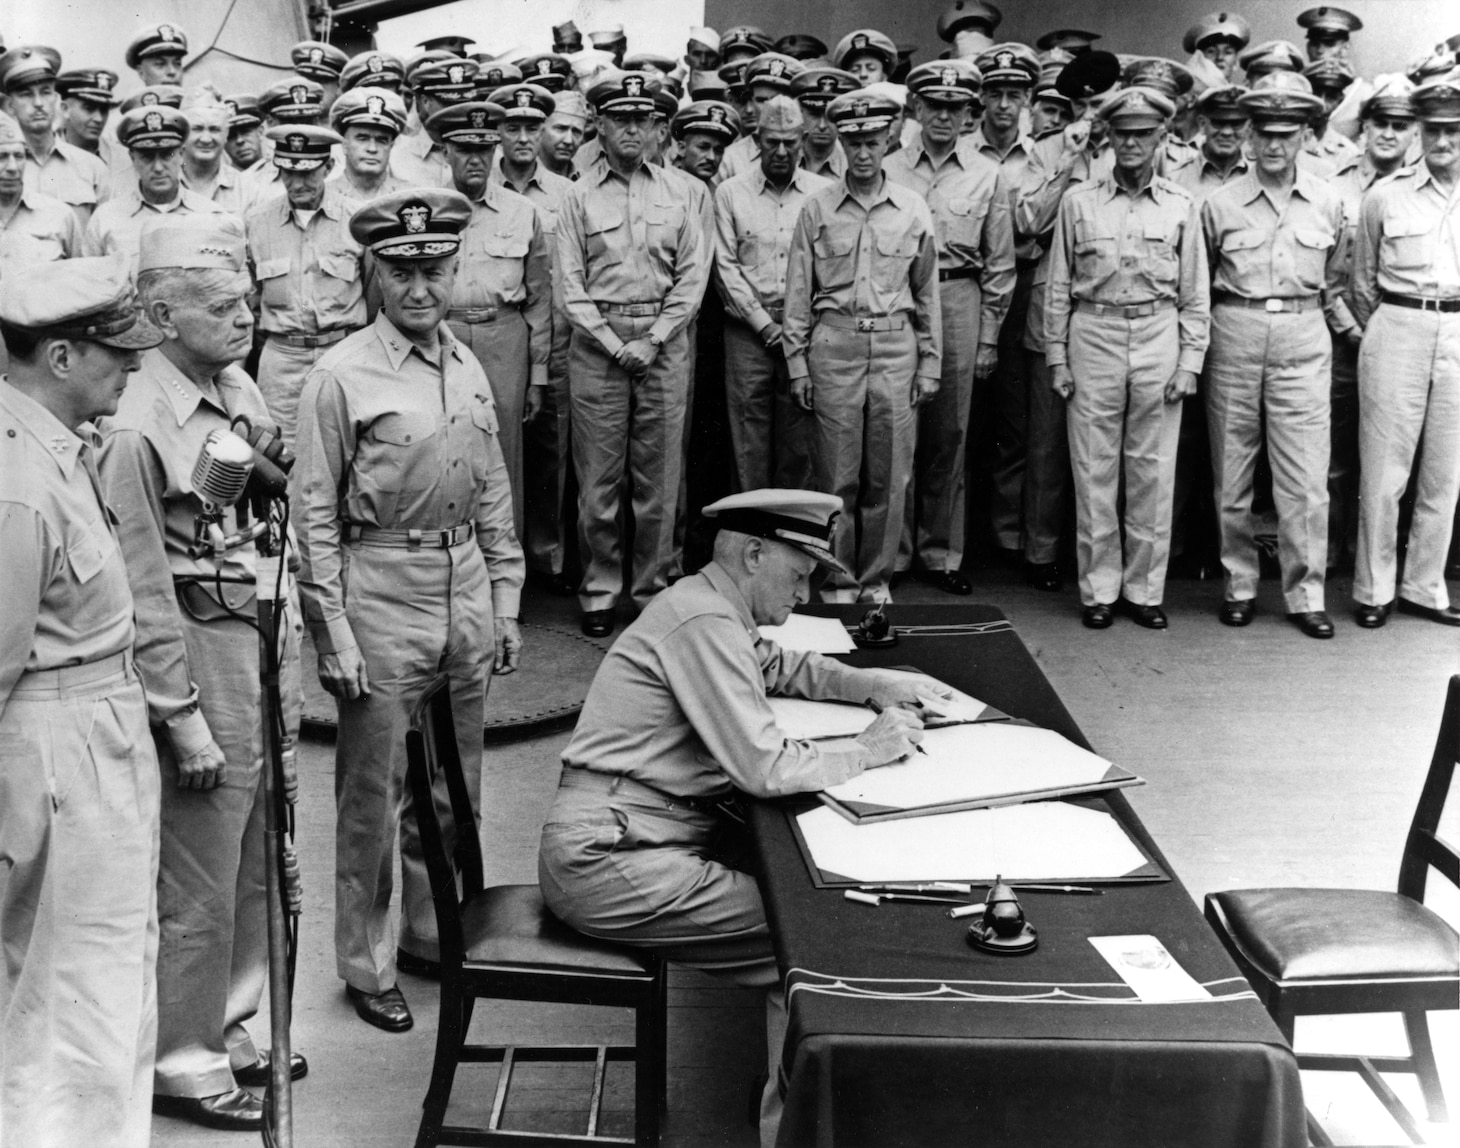 Fleet Admiral Chester W. Nimitz signs the Instrument of Surrender as United States Representative aboard the battleship USS Missouri (BB-63) in Tokyo, Japan,  Sept. 2, 1945.